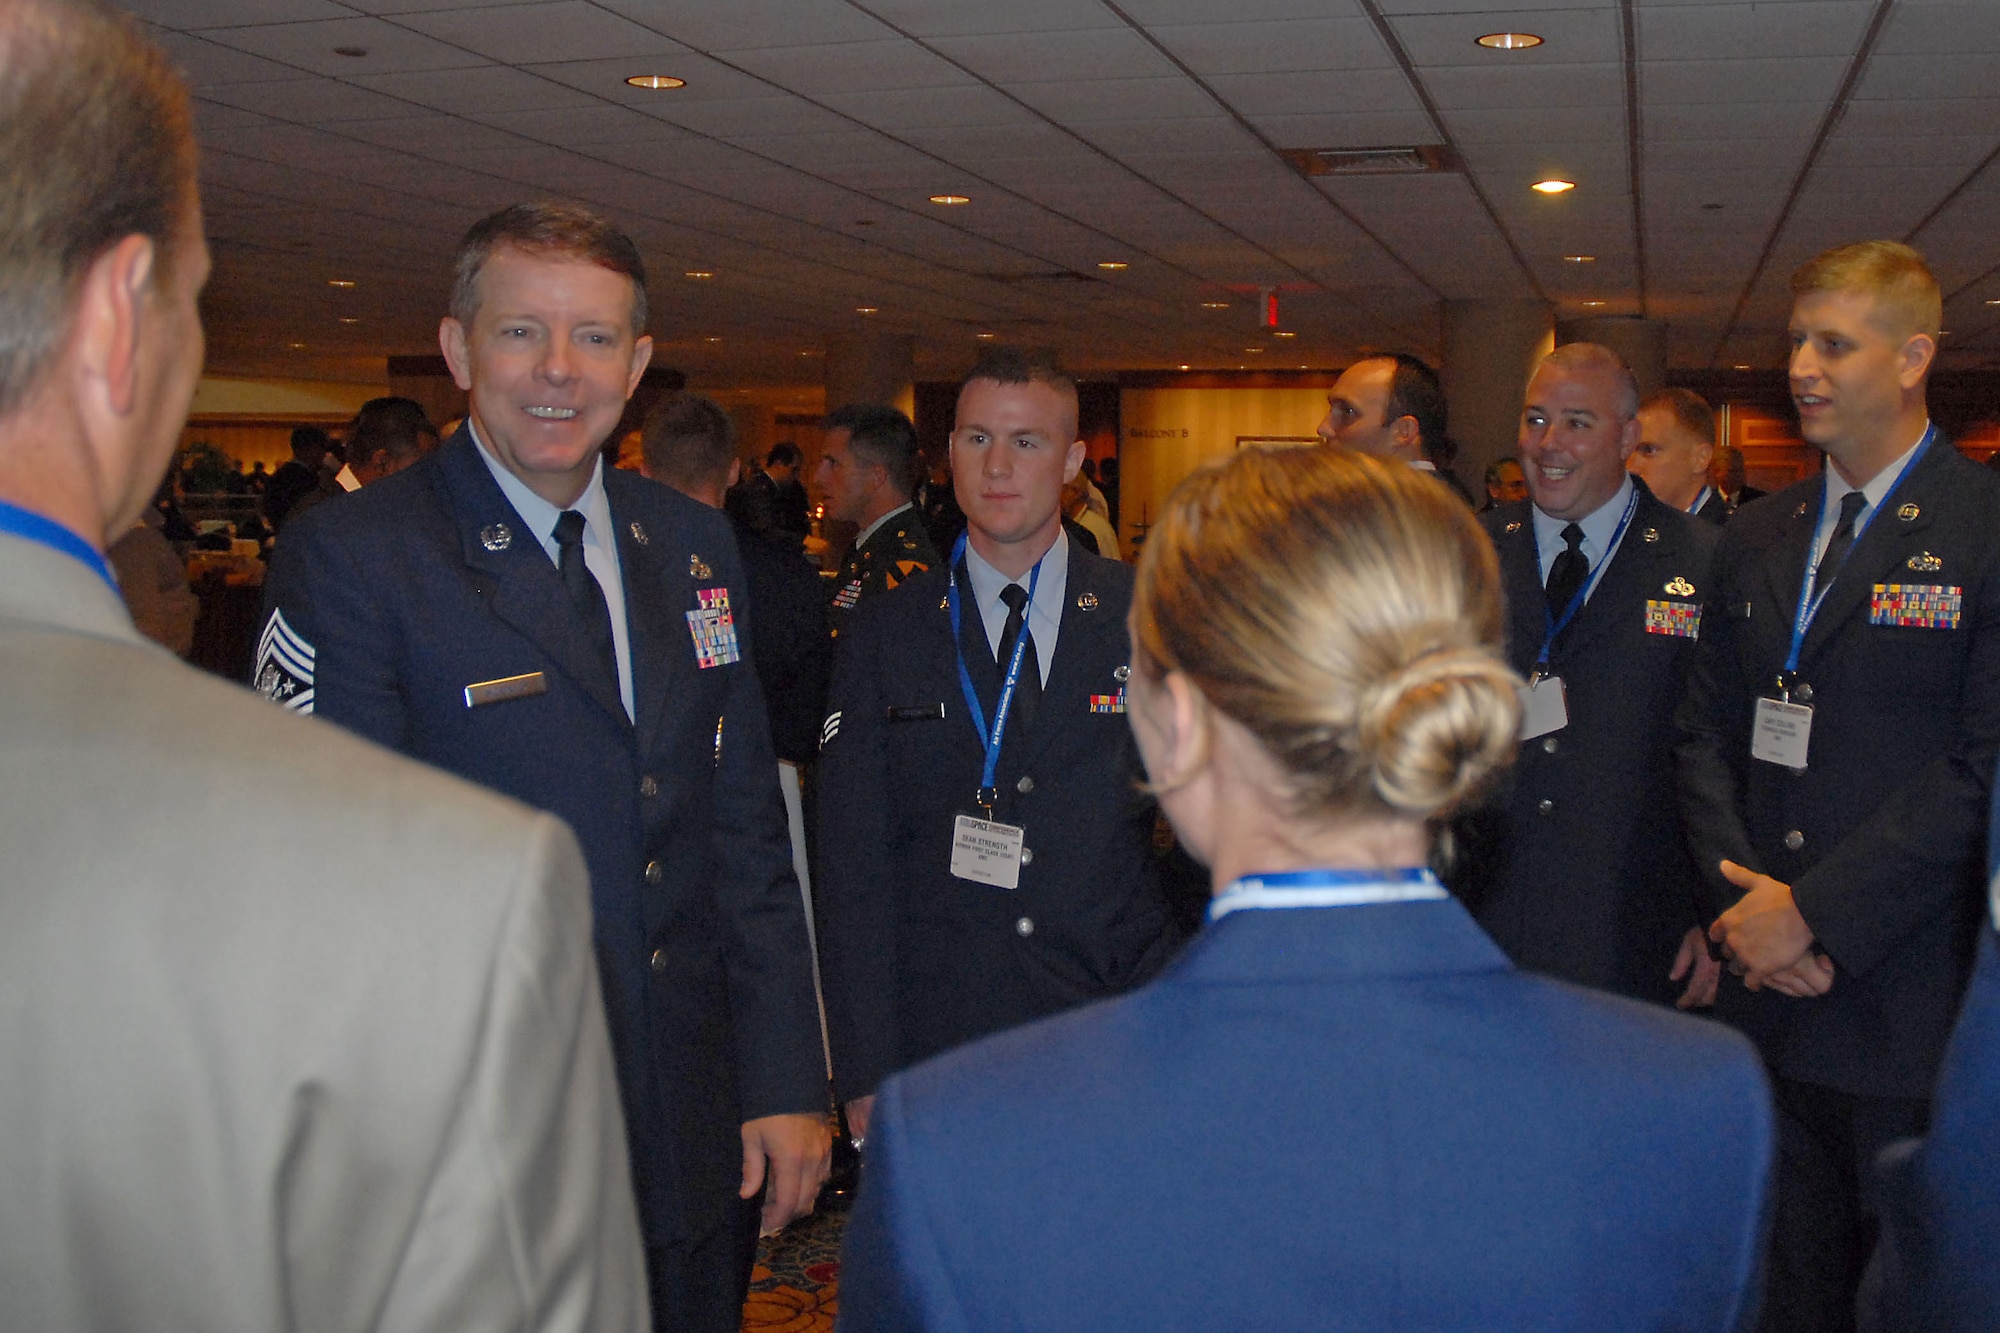 Chief Master Sgt. of the Air Force Rodney McKinley talks to Team Charleston members prior to the start of the Air Force Association?s Air & Space Conference and Technology Exposition in Washington, D.C., Sept. 15. The 437th Airlift Wing was named the Verne Orr Award recipient in May and went to the conference to accept the award. (U.S. Air Force photo/Airman 1st Class Melissa White)